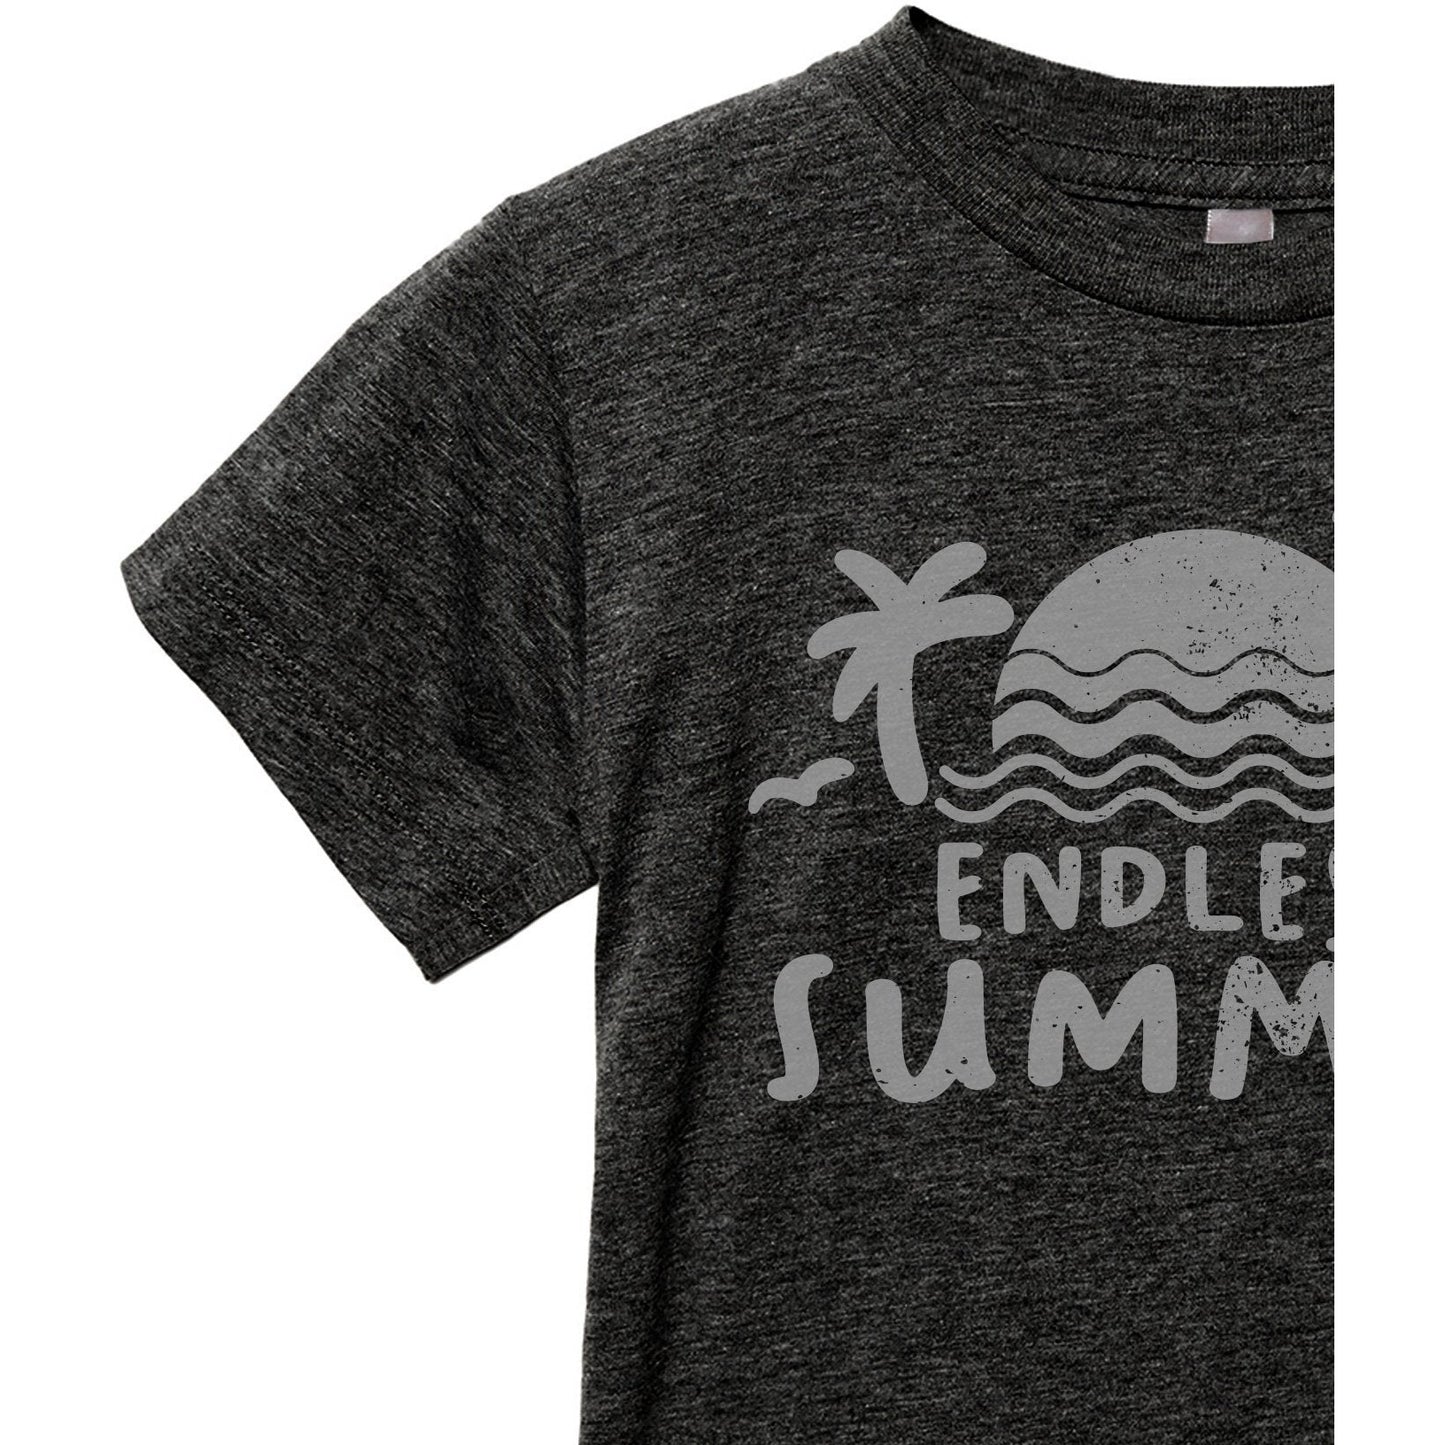 Endless Summer Toddler's Go-To Crewneck Tee Charcoal Zoom Details A